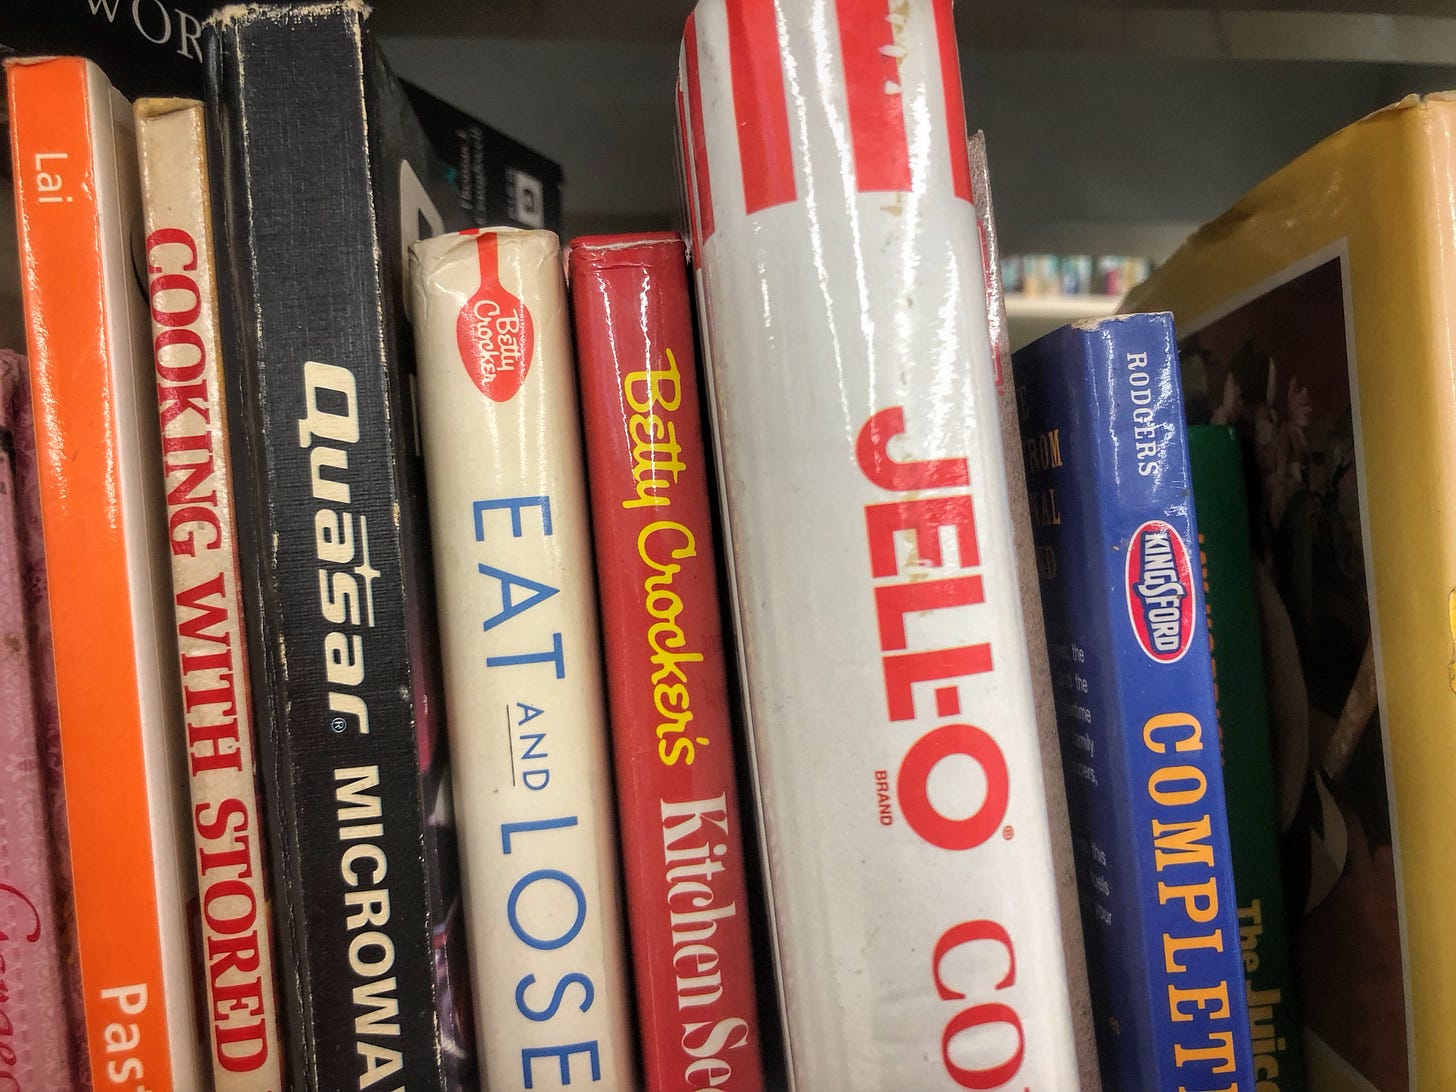 The spines of cookbooks published by Quasar Microwaves, Betty Crocker, Jell-O, and Kingsford Charcoal on the shelf in a thrift store